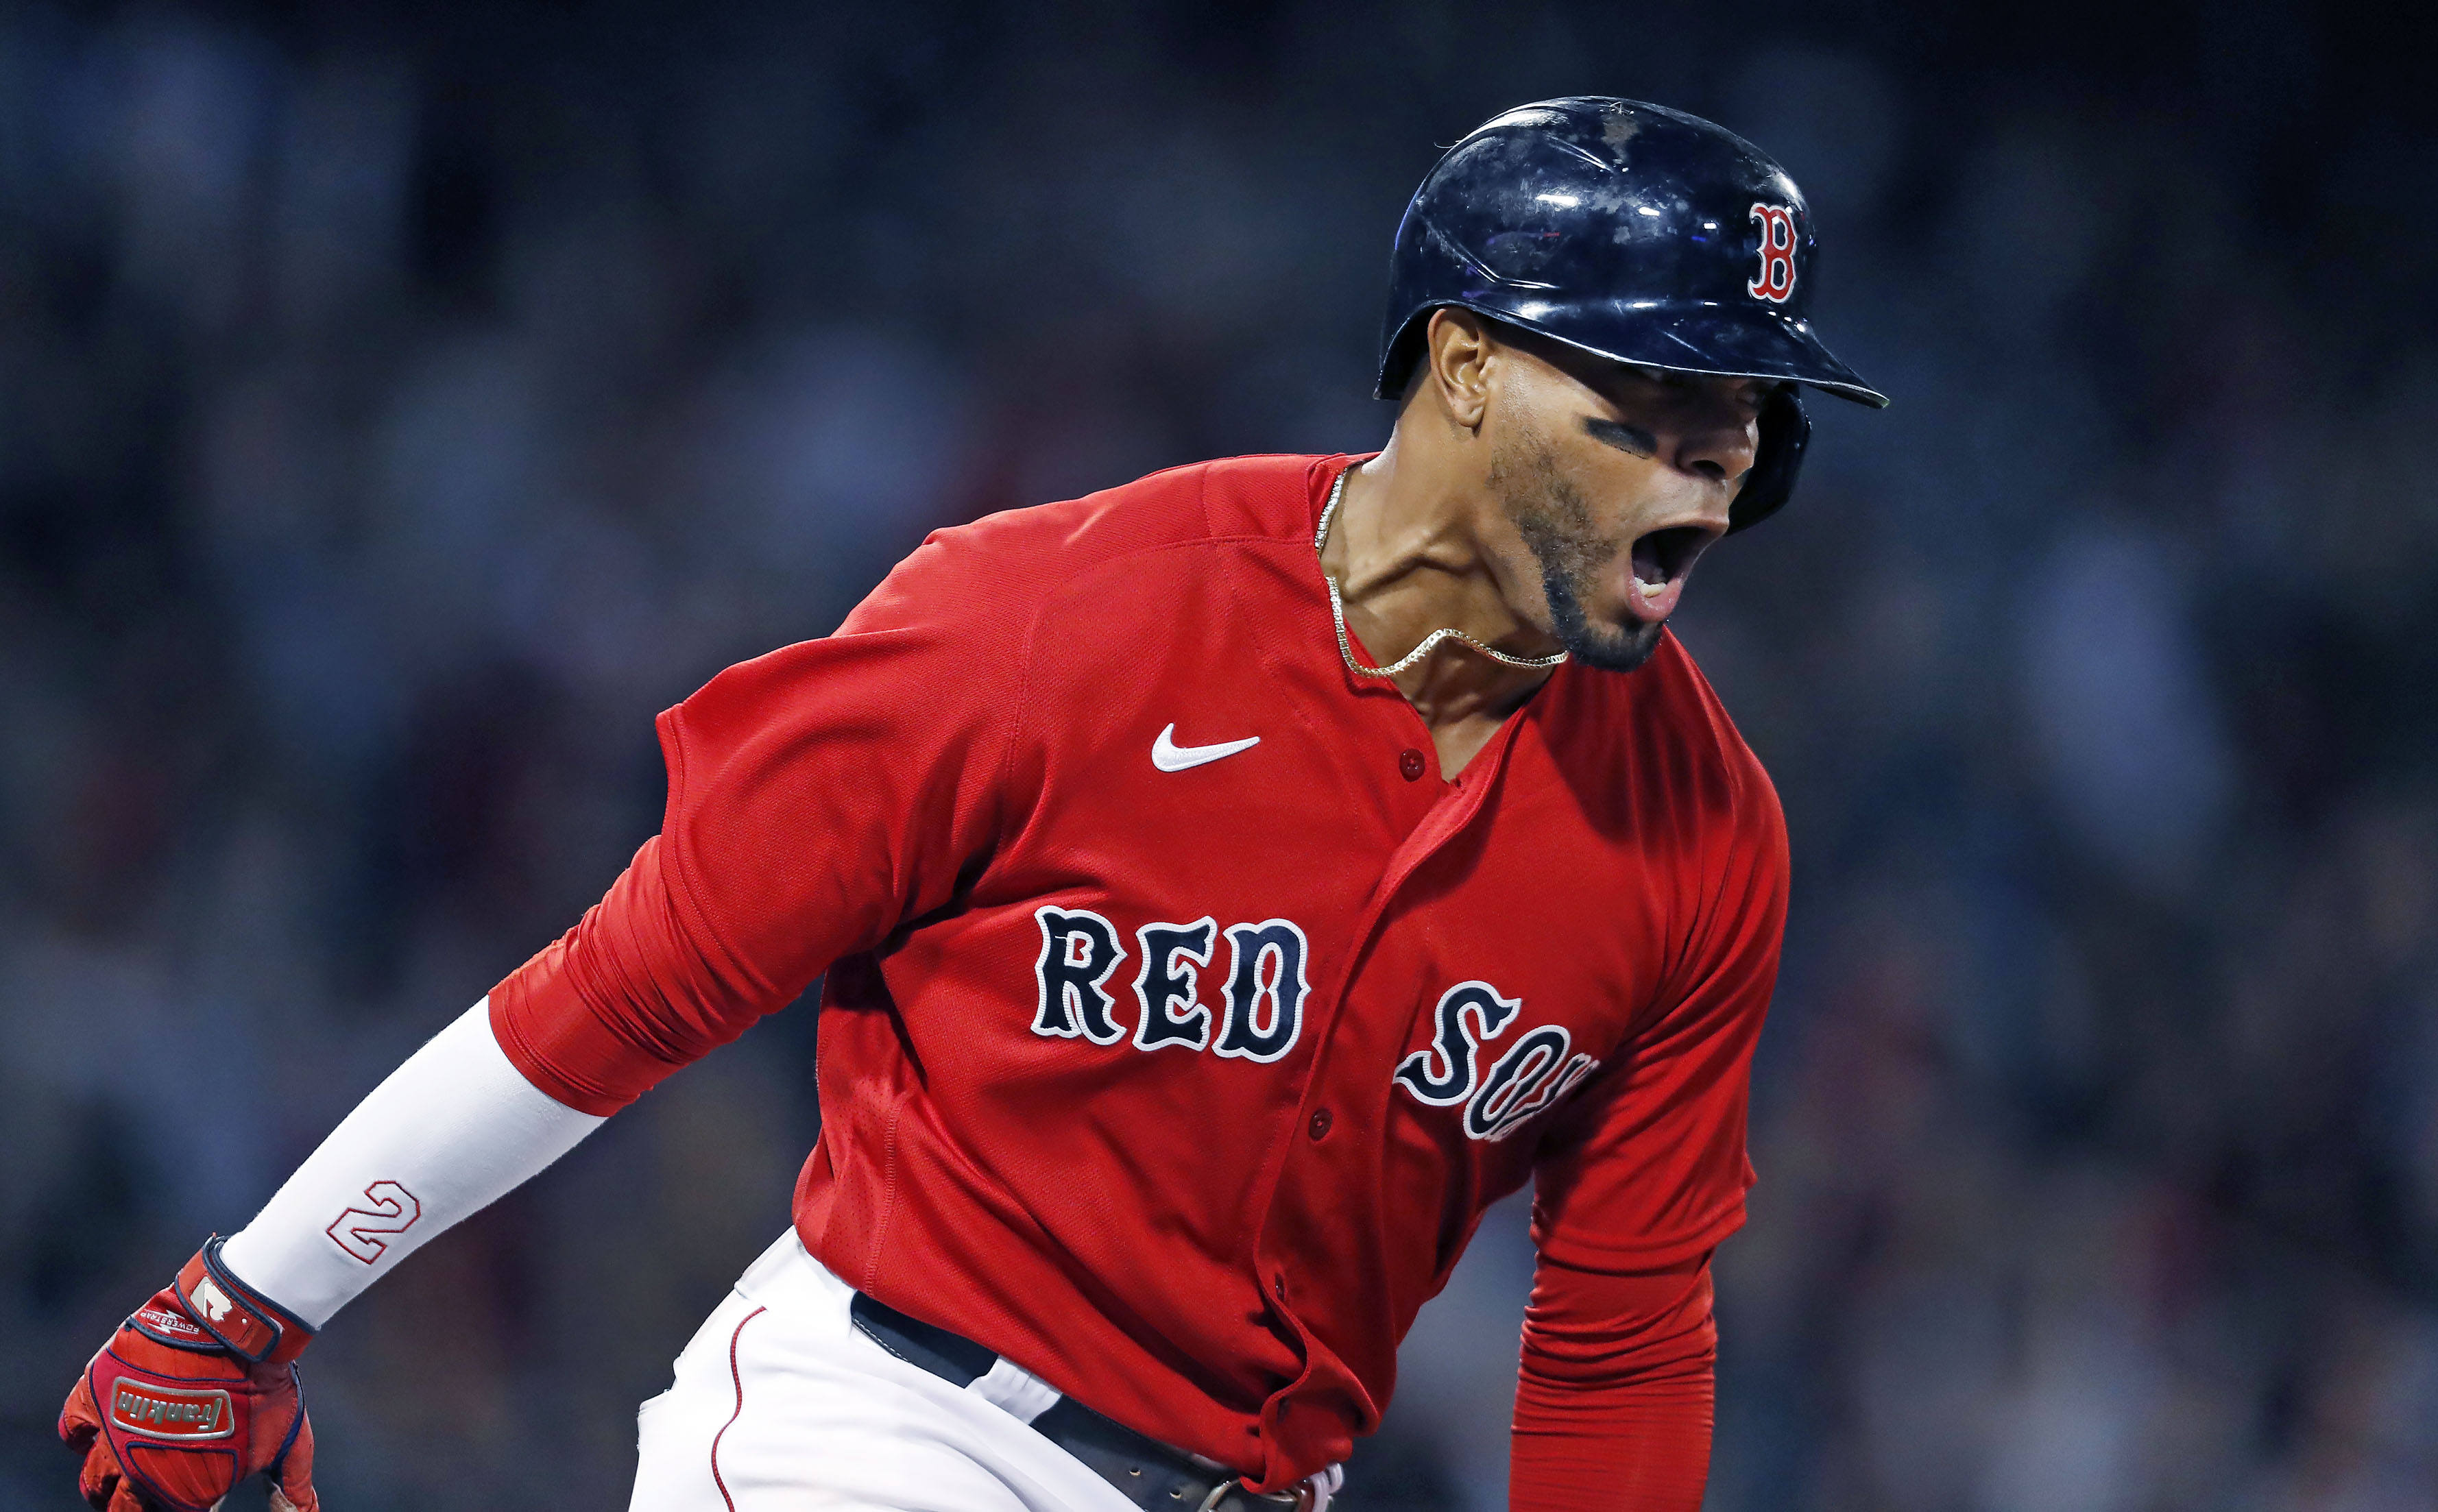 Xander Bogaerts and Kyle Schwarber both homer as Red Sox defeat